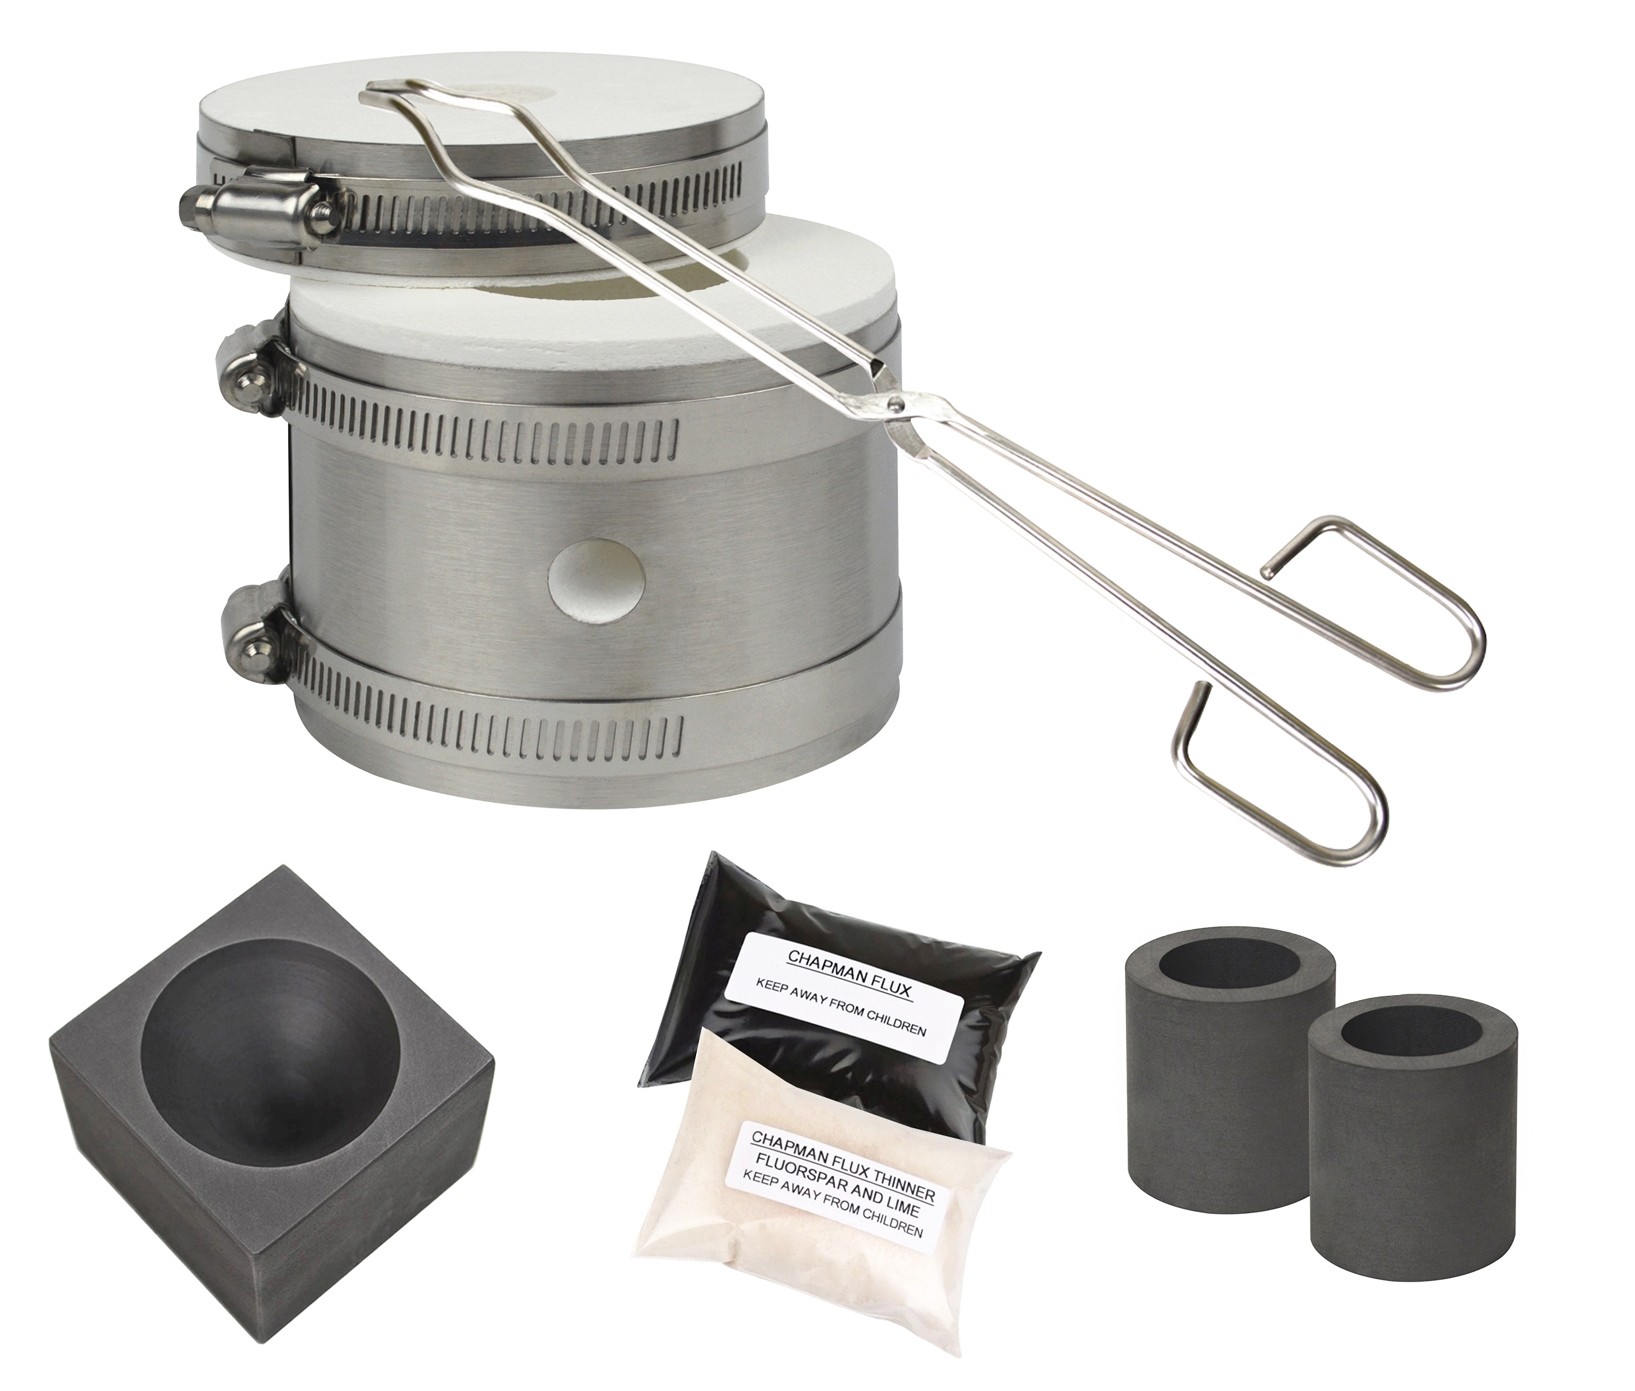 Smelting Furnace Kit with Crucibles for Melting Metal, Tongs